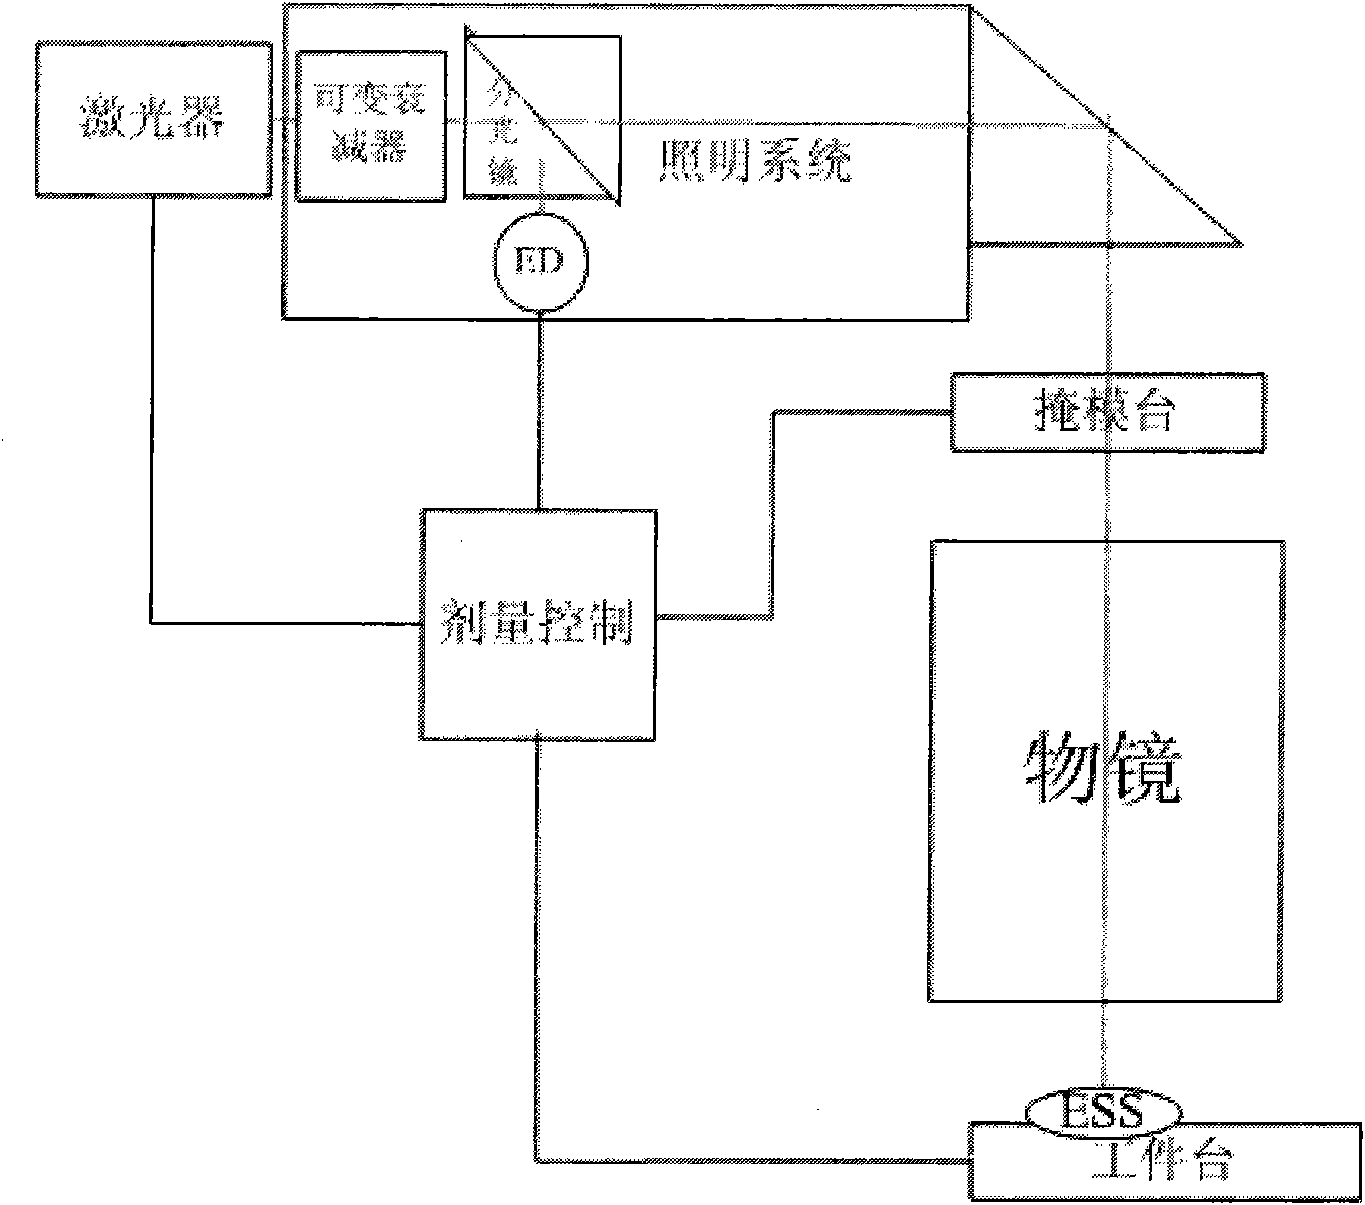 Lighting dose real-time controlling apparatus in photolithography system